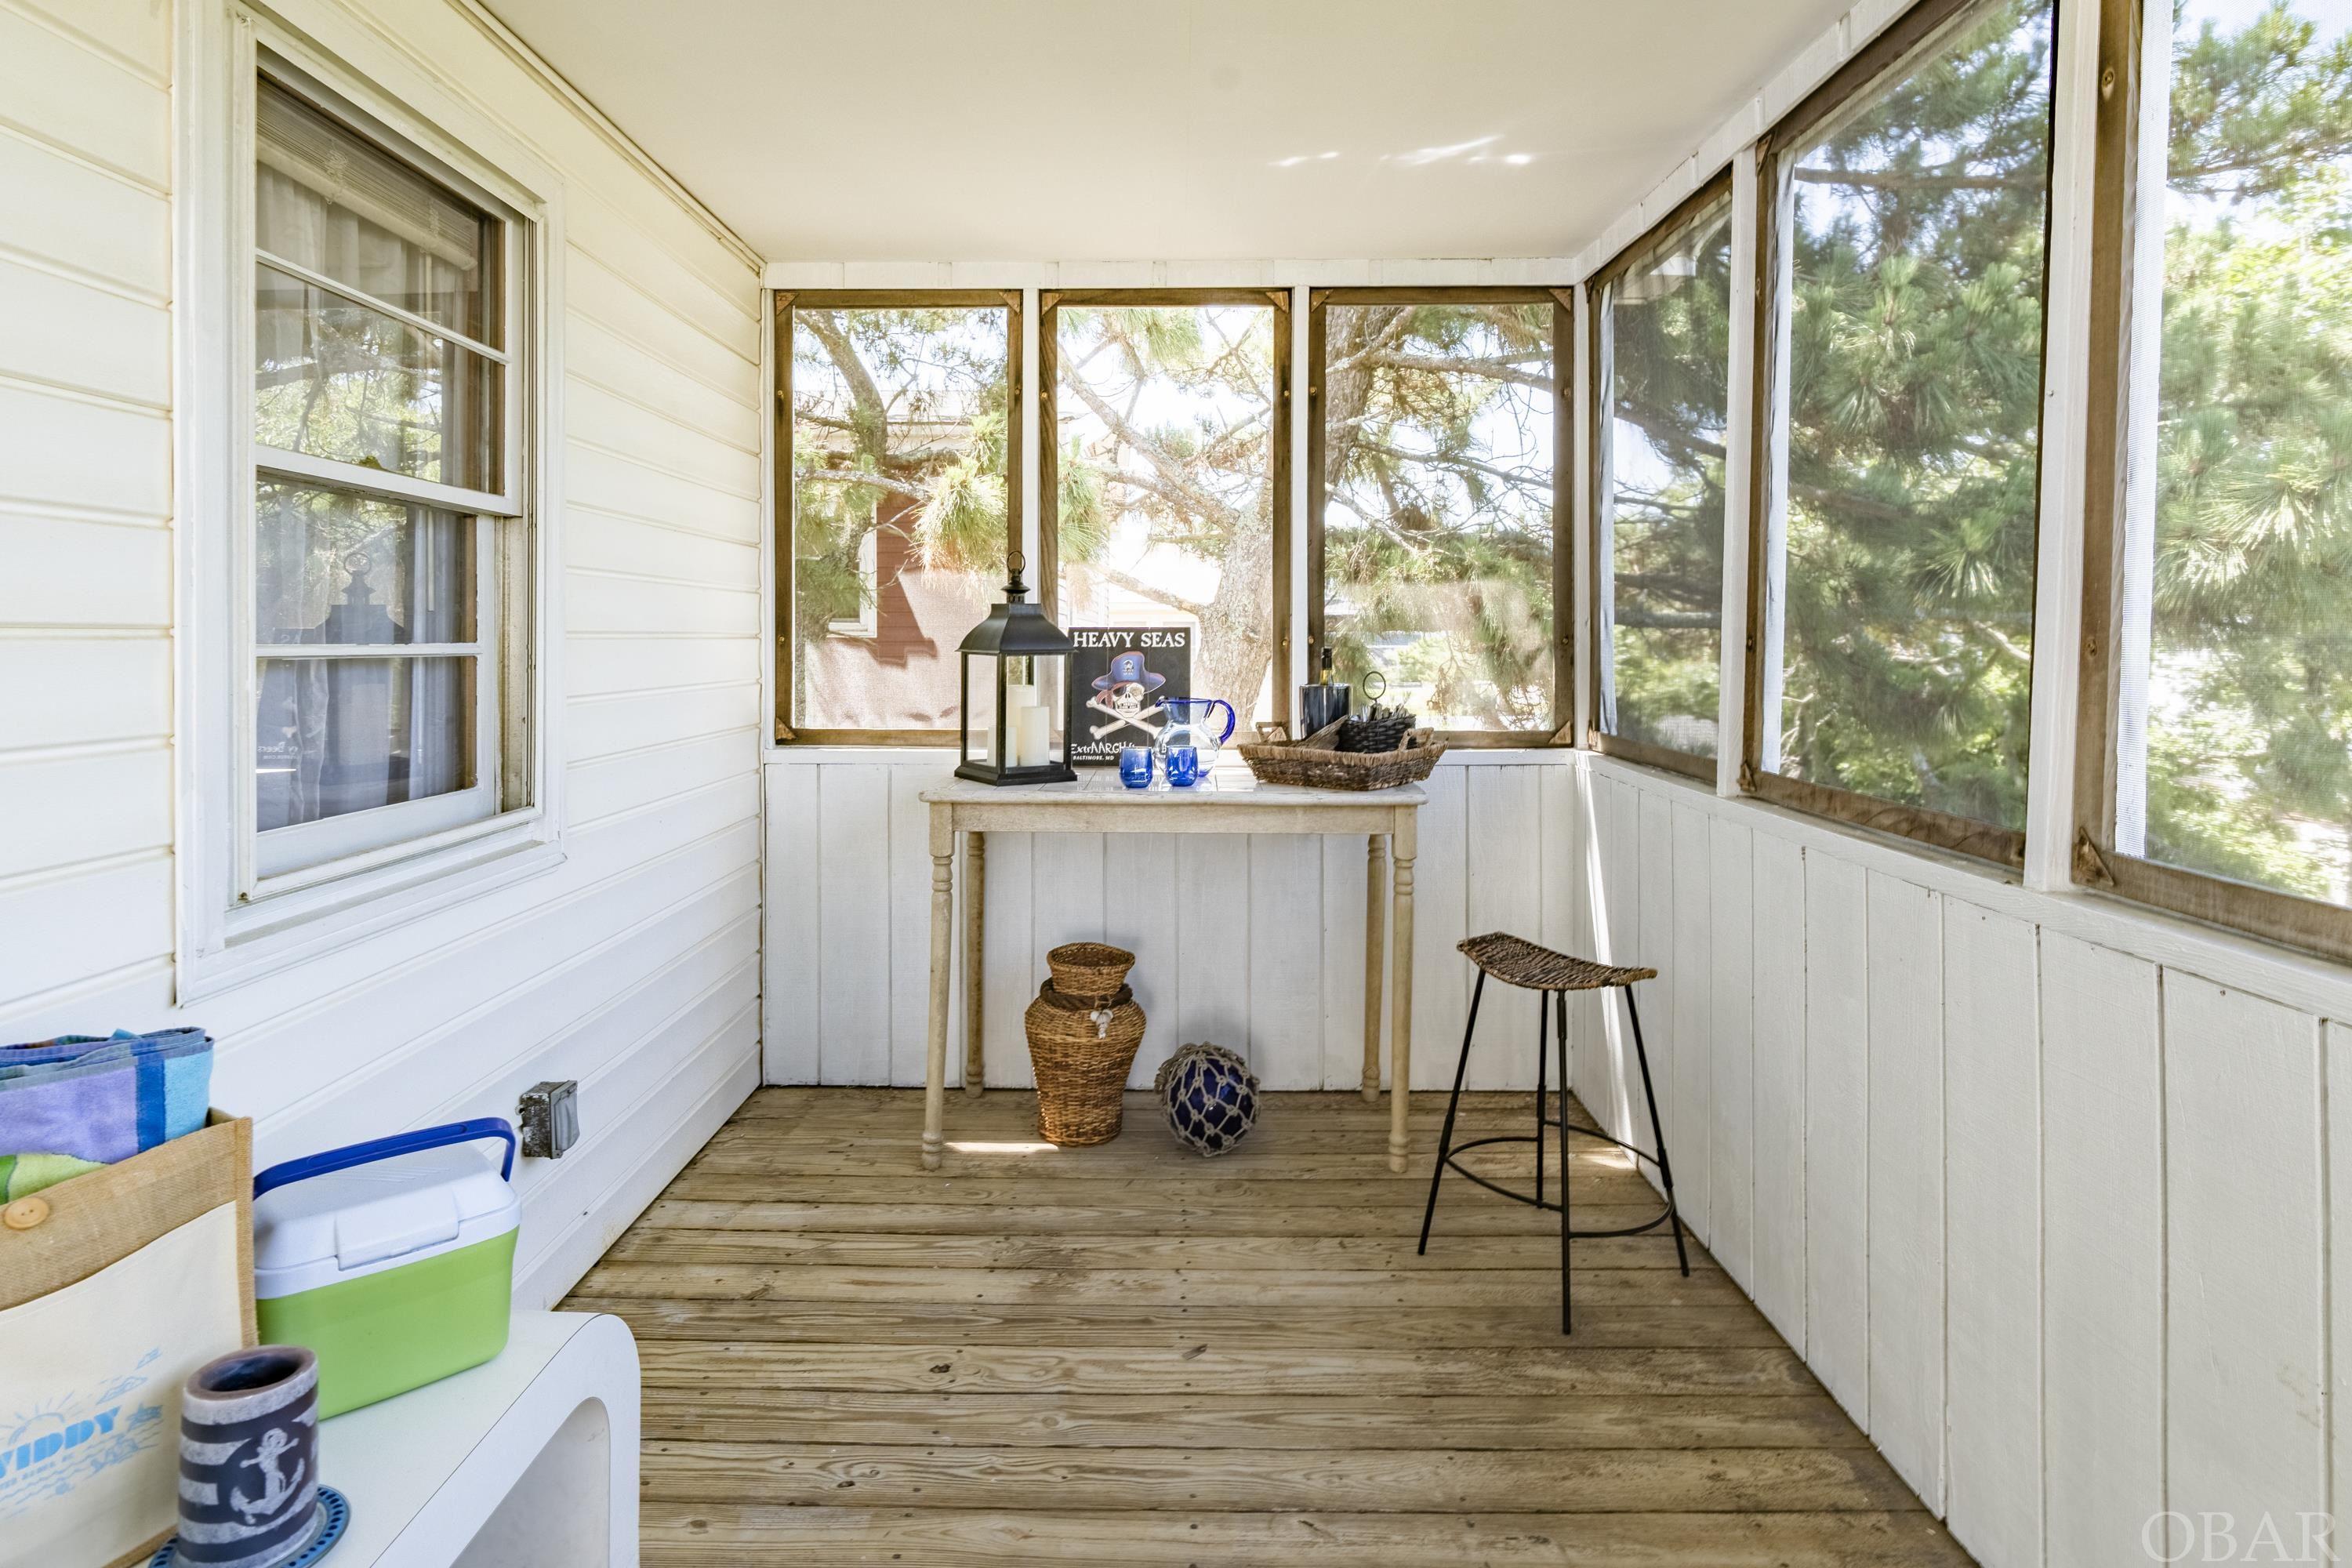 The rear screened porch is great for sharing some laughs!